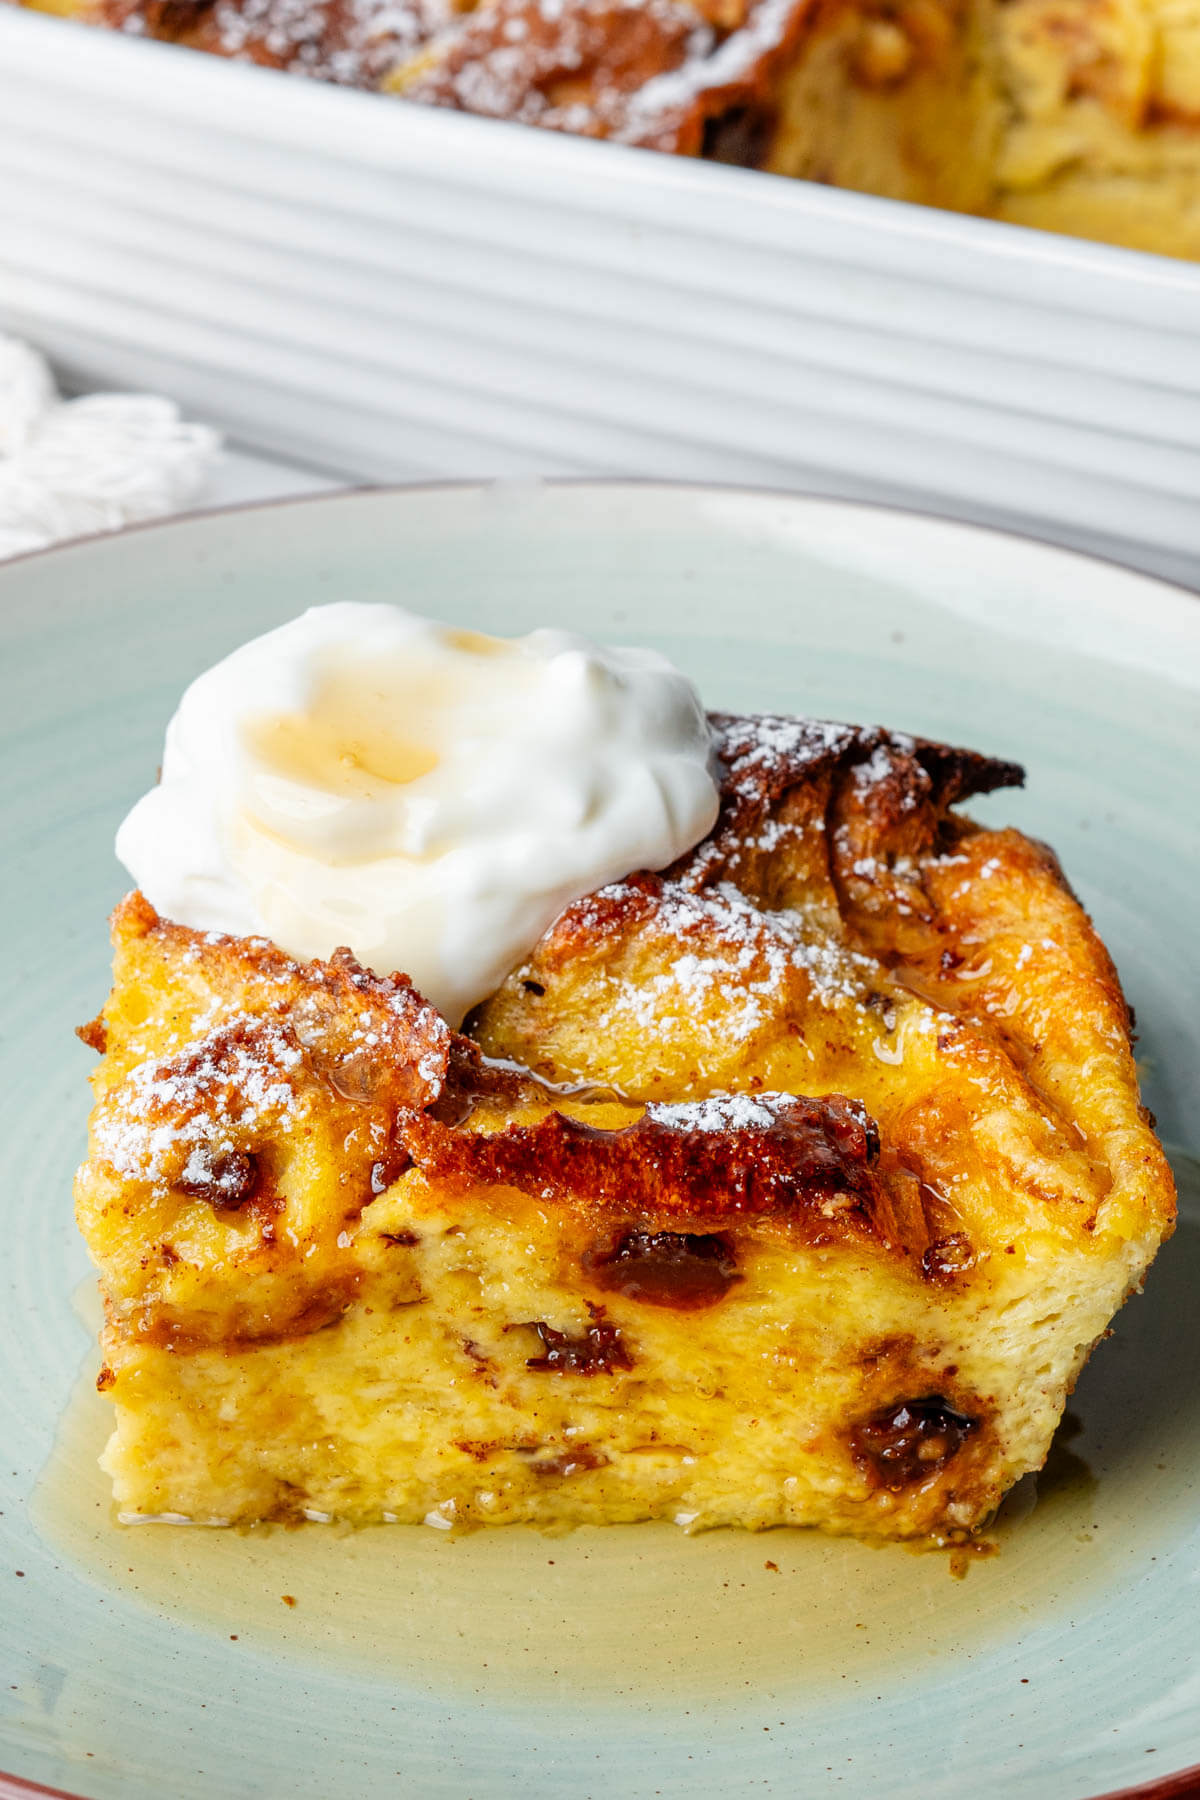 Piece of Panettone bread pudding on a plate, topped with yogurt and maple syrup